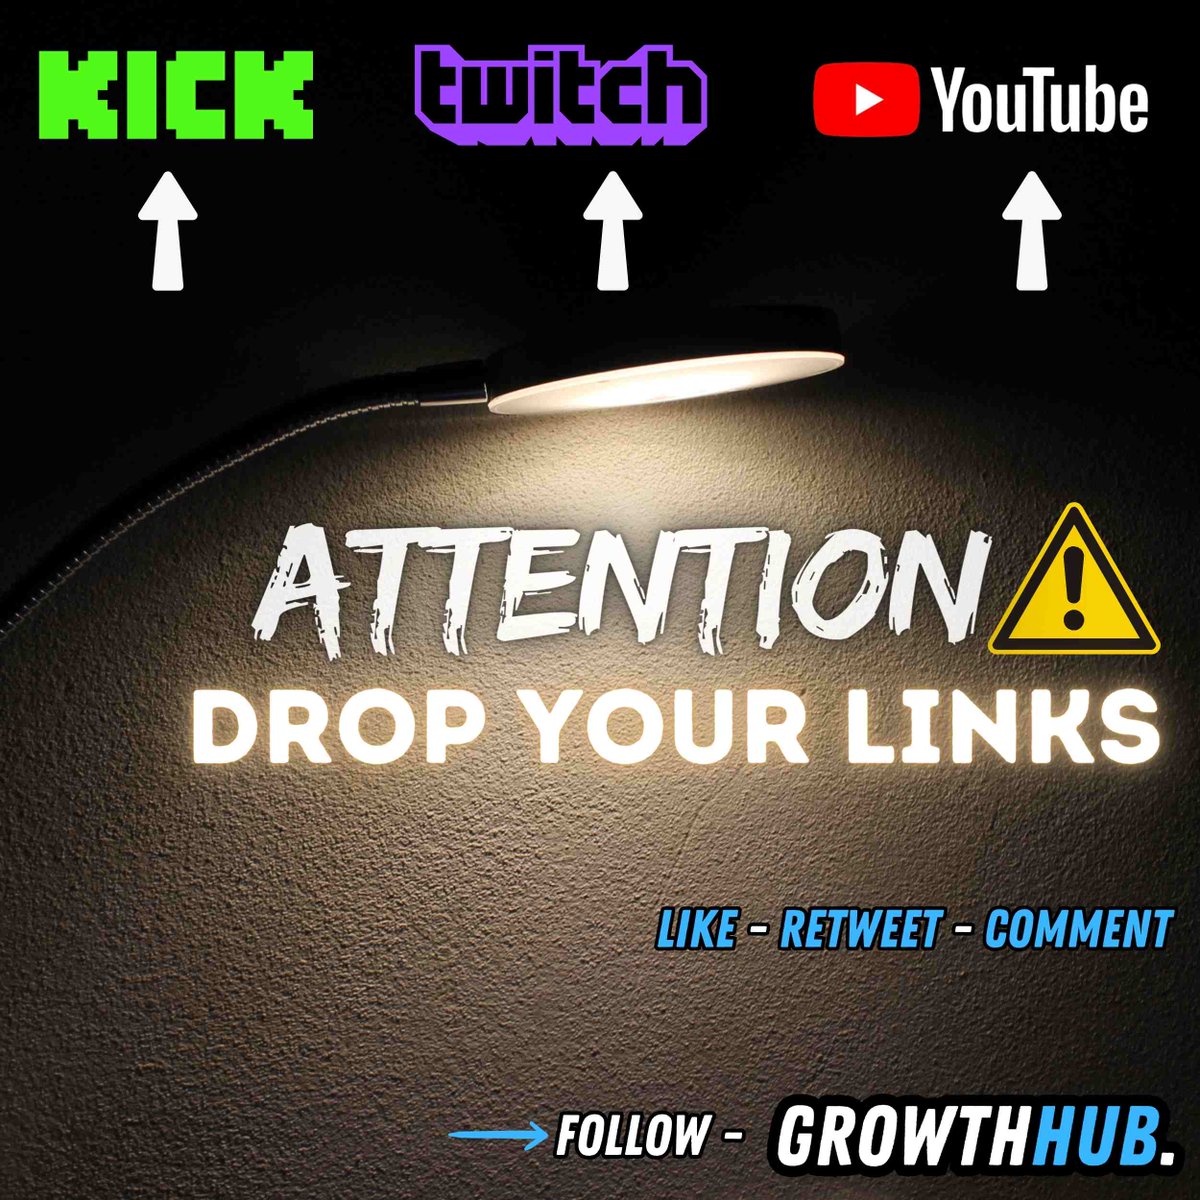 Streamer & Content Creators! 
Let's grow together. Drop your links! 🎮 
-👍FOLLOW ME 
-  Drop YT / Twitch / kick 
-🚶LIKE + REPOST 🔥
Dm For special promo
#twitchstreamer #Communitygrowth #youtubegaming #Kick #twitchaffiliate